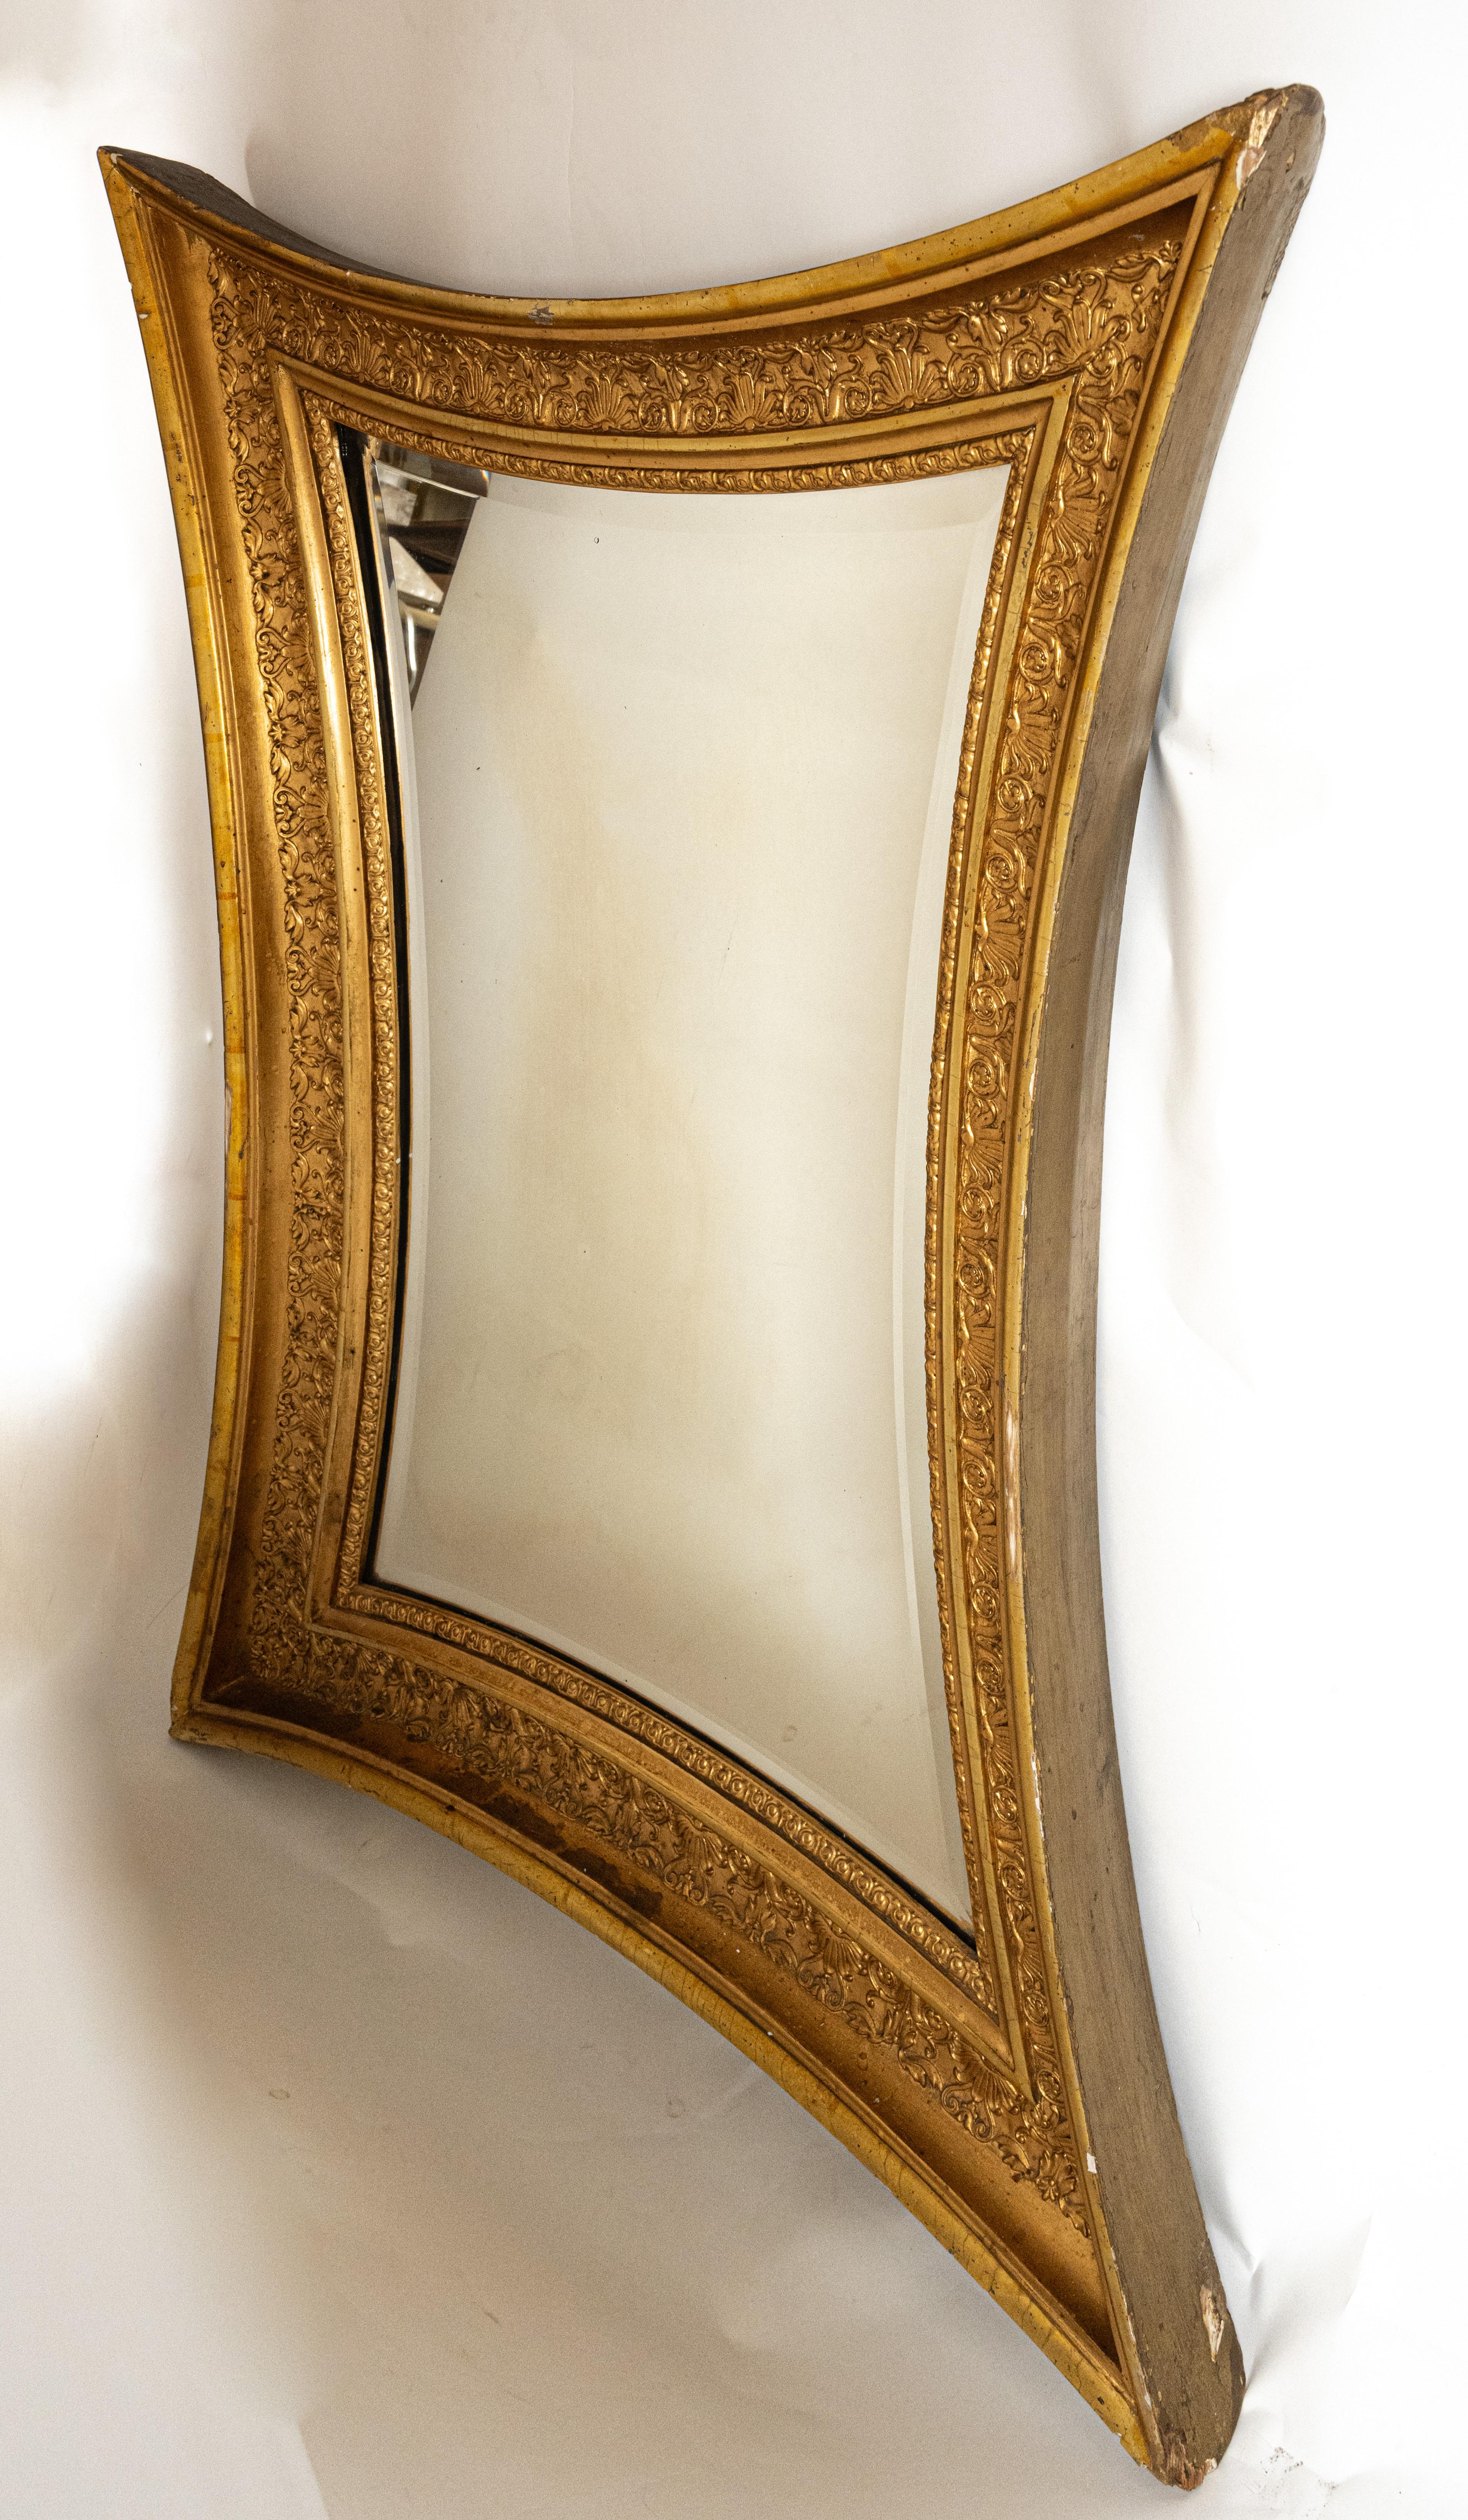 Swedish Karl-Johan period mirror. The carved giltwood gesso frame having raised carved details and antique beveled glass. Circa 1820s.

Signed by the maker. Partial label from Stockholmaker

Interior of frame measures 14-1/2in x 25in.